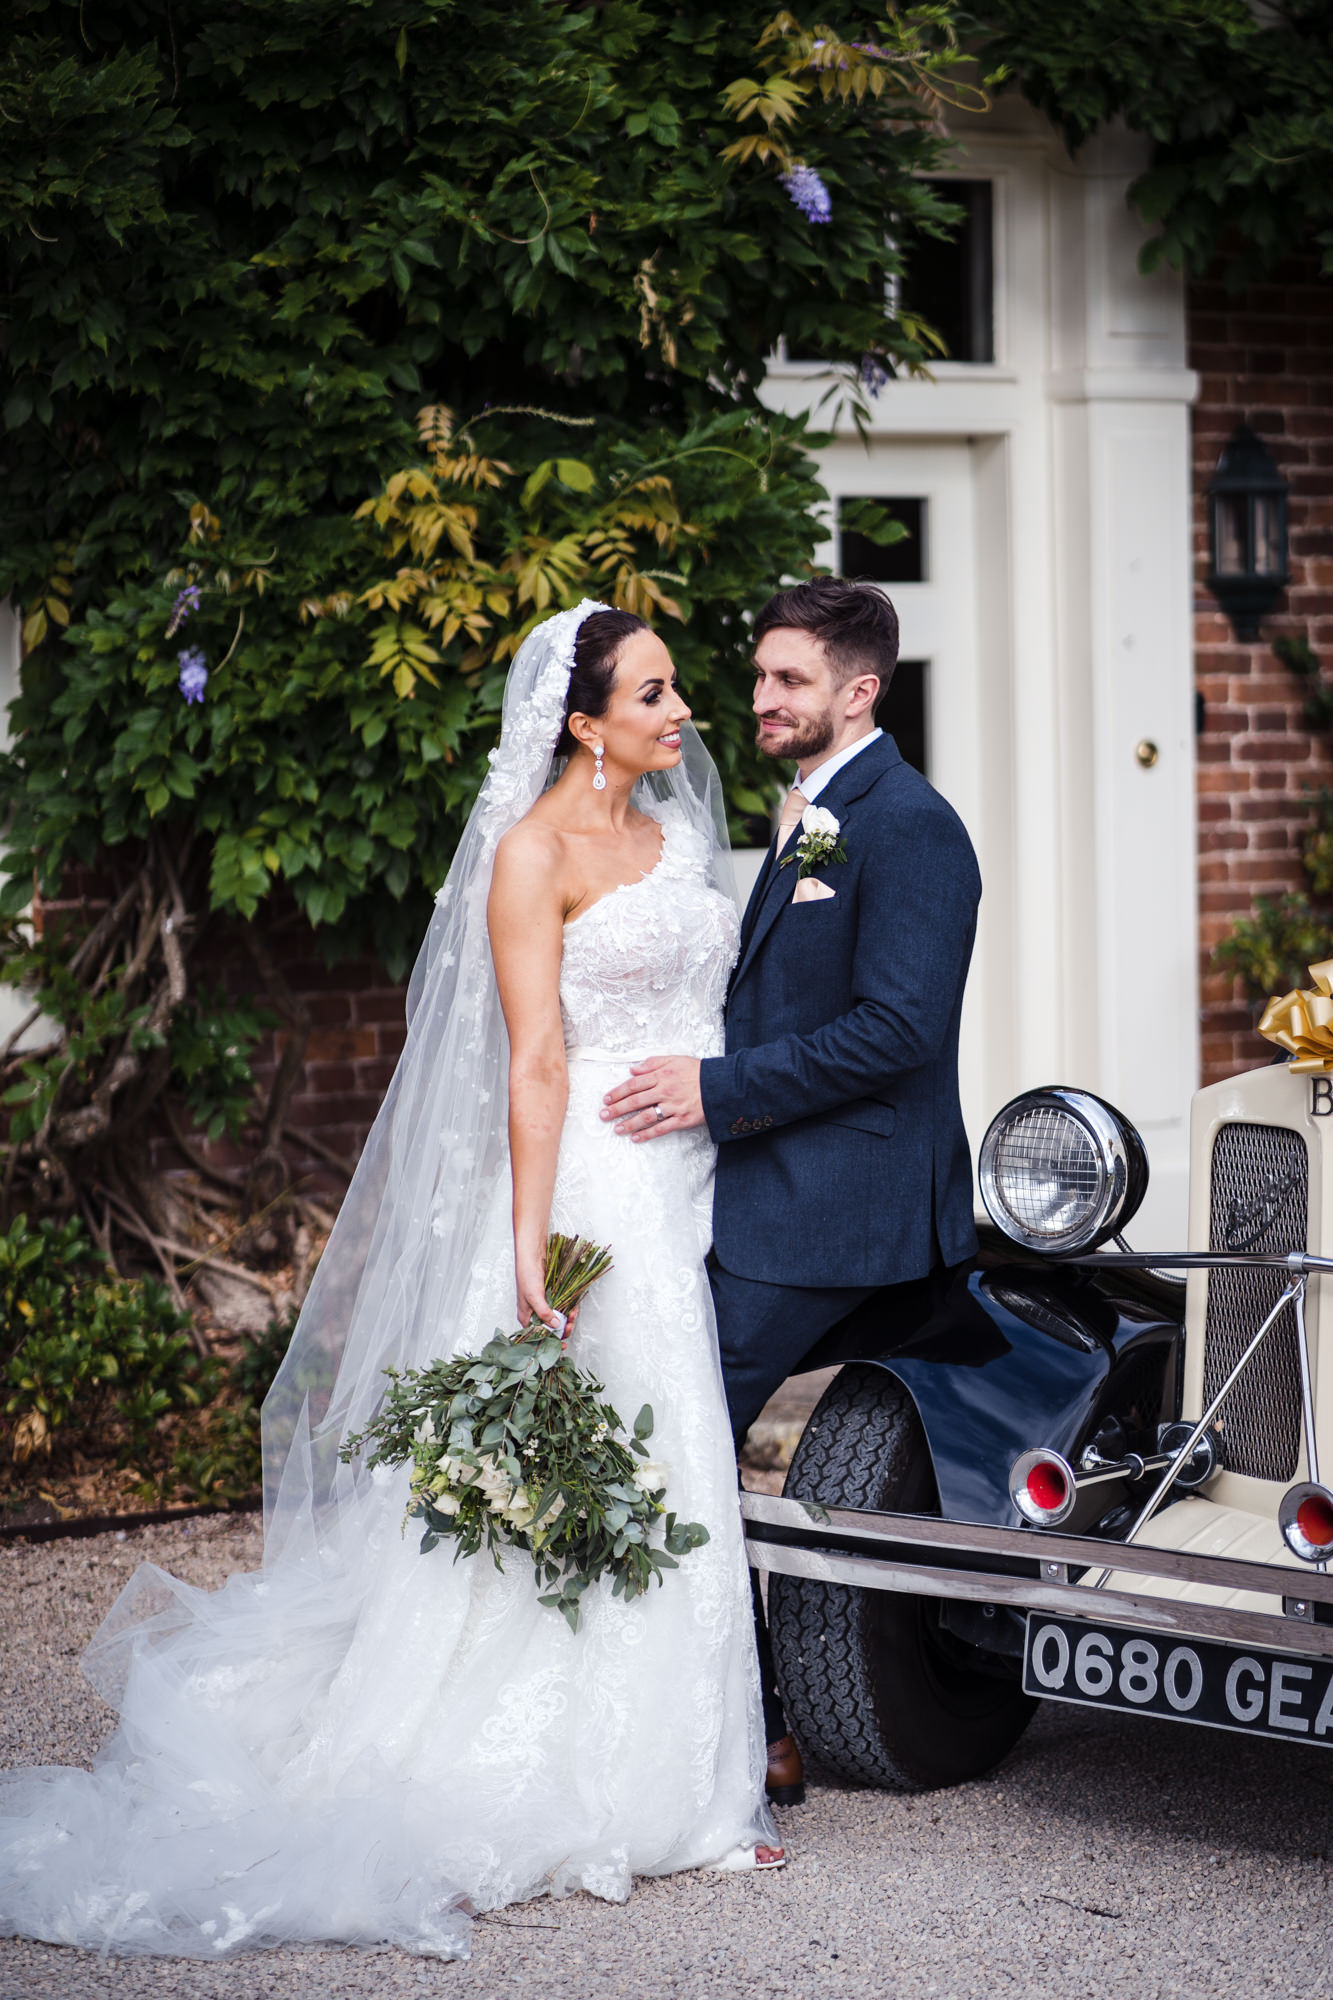 bride and groom embrace leaning against classic wedding car at wedding venue